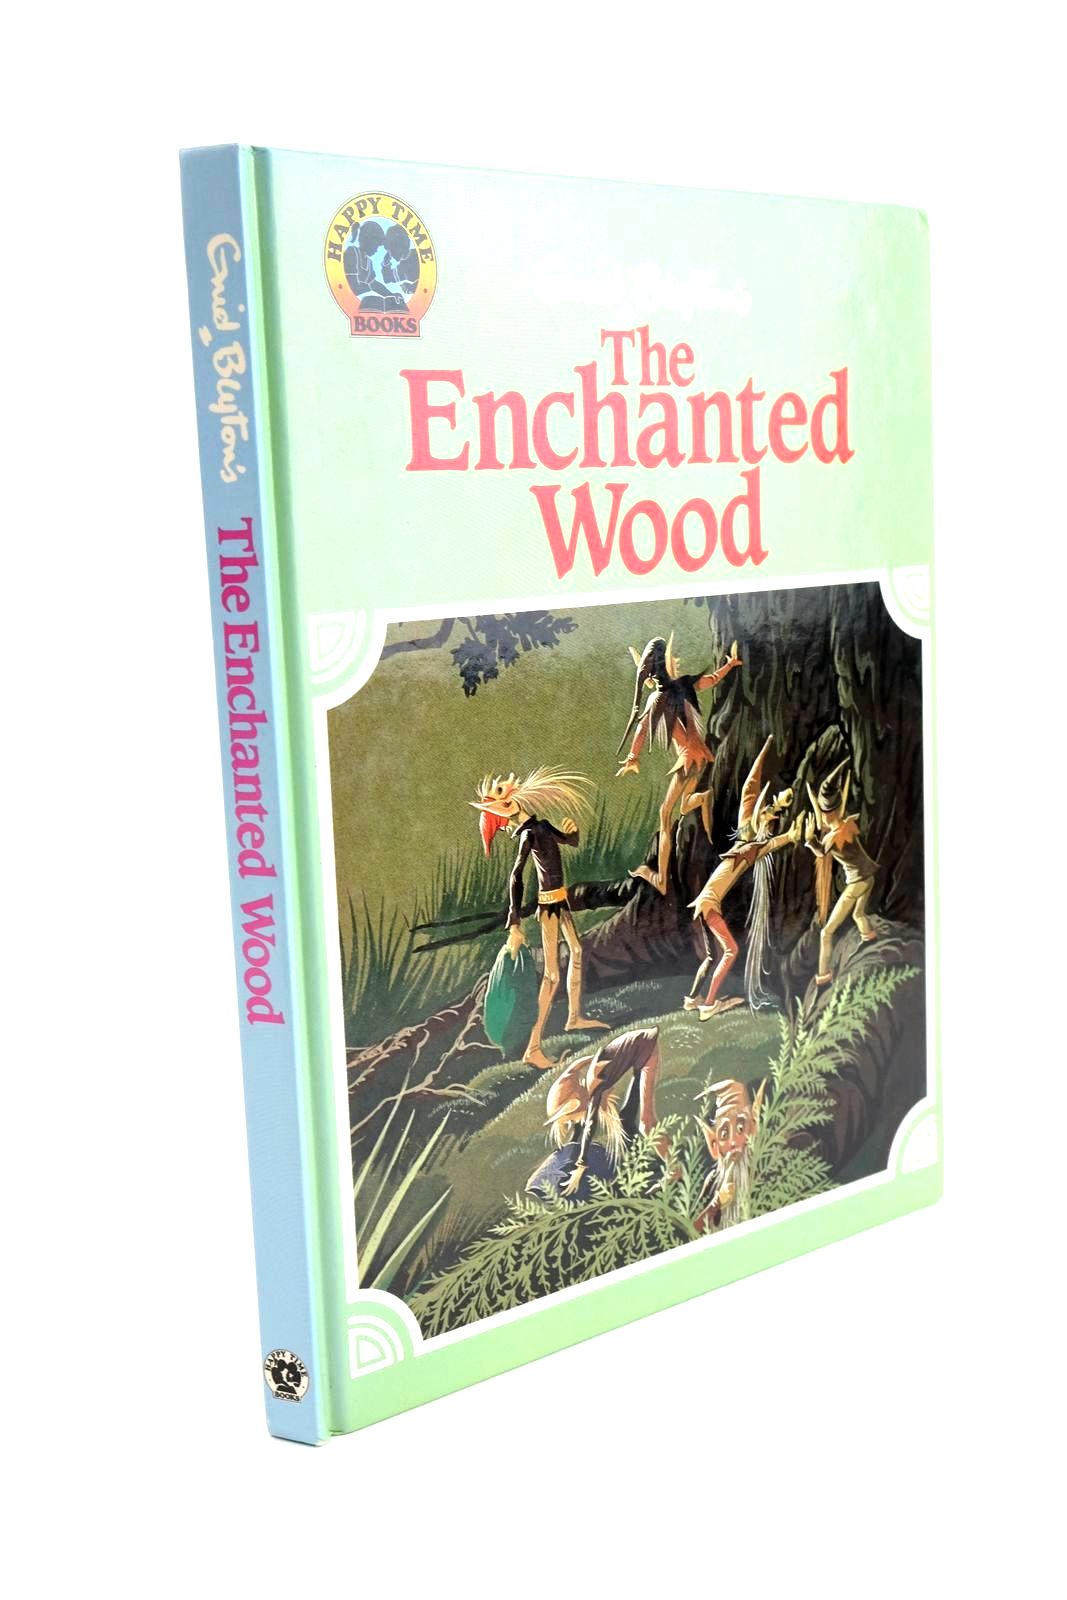 Photo of THE ENCHANTED WOOD written by Blyton, Enid illustrated by Johnstone, Janet Grahame Johnstone, Anne Grahame published by Budget Books (STOCK CODE: 1323307)  for sale by Stella & Rose's Books